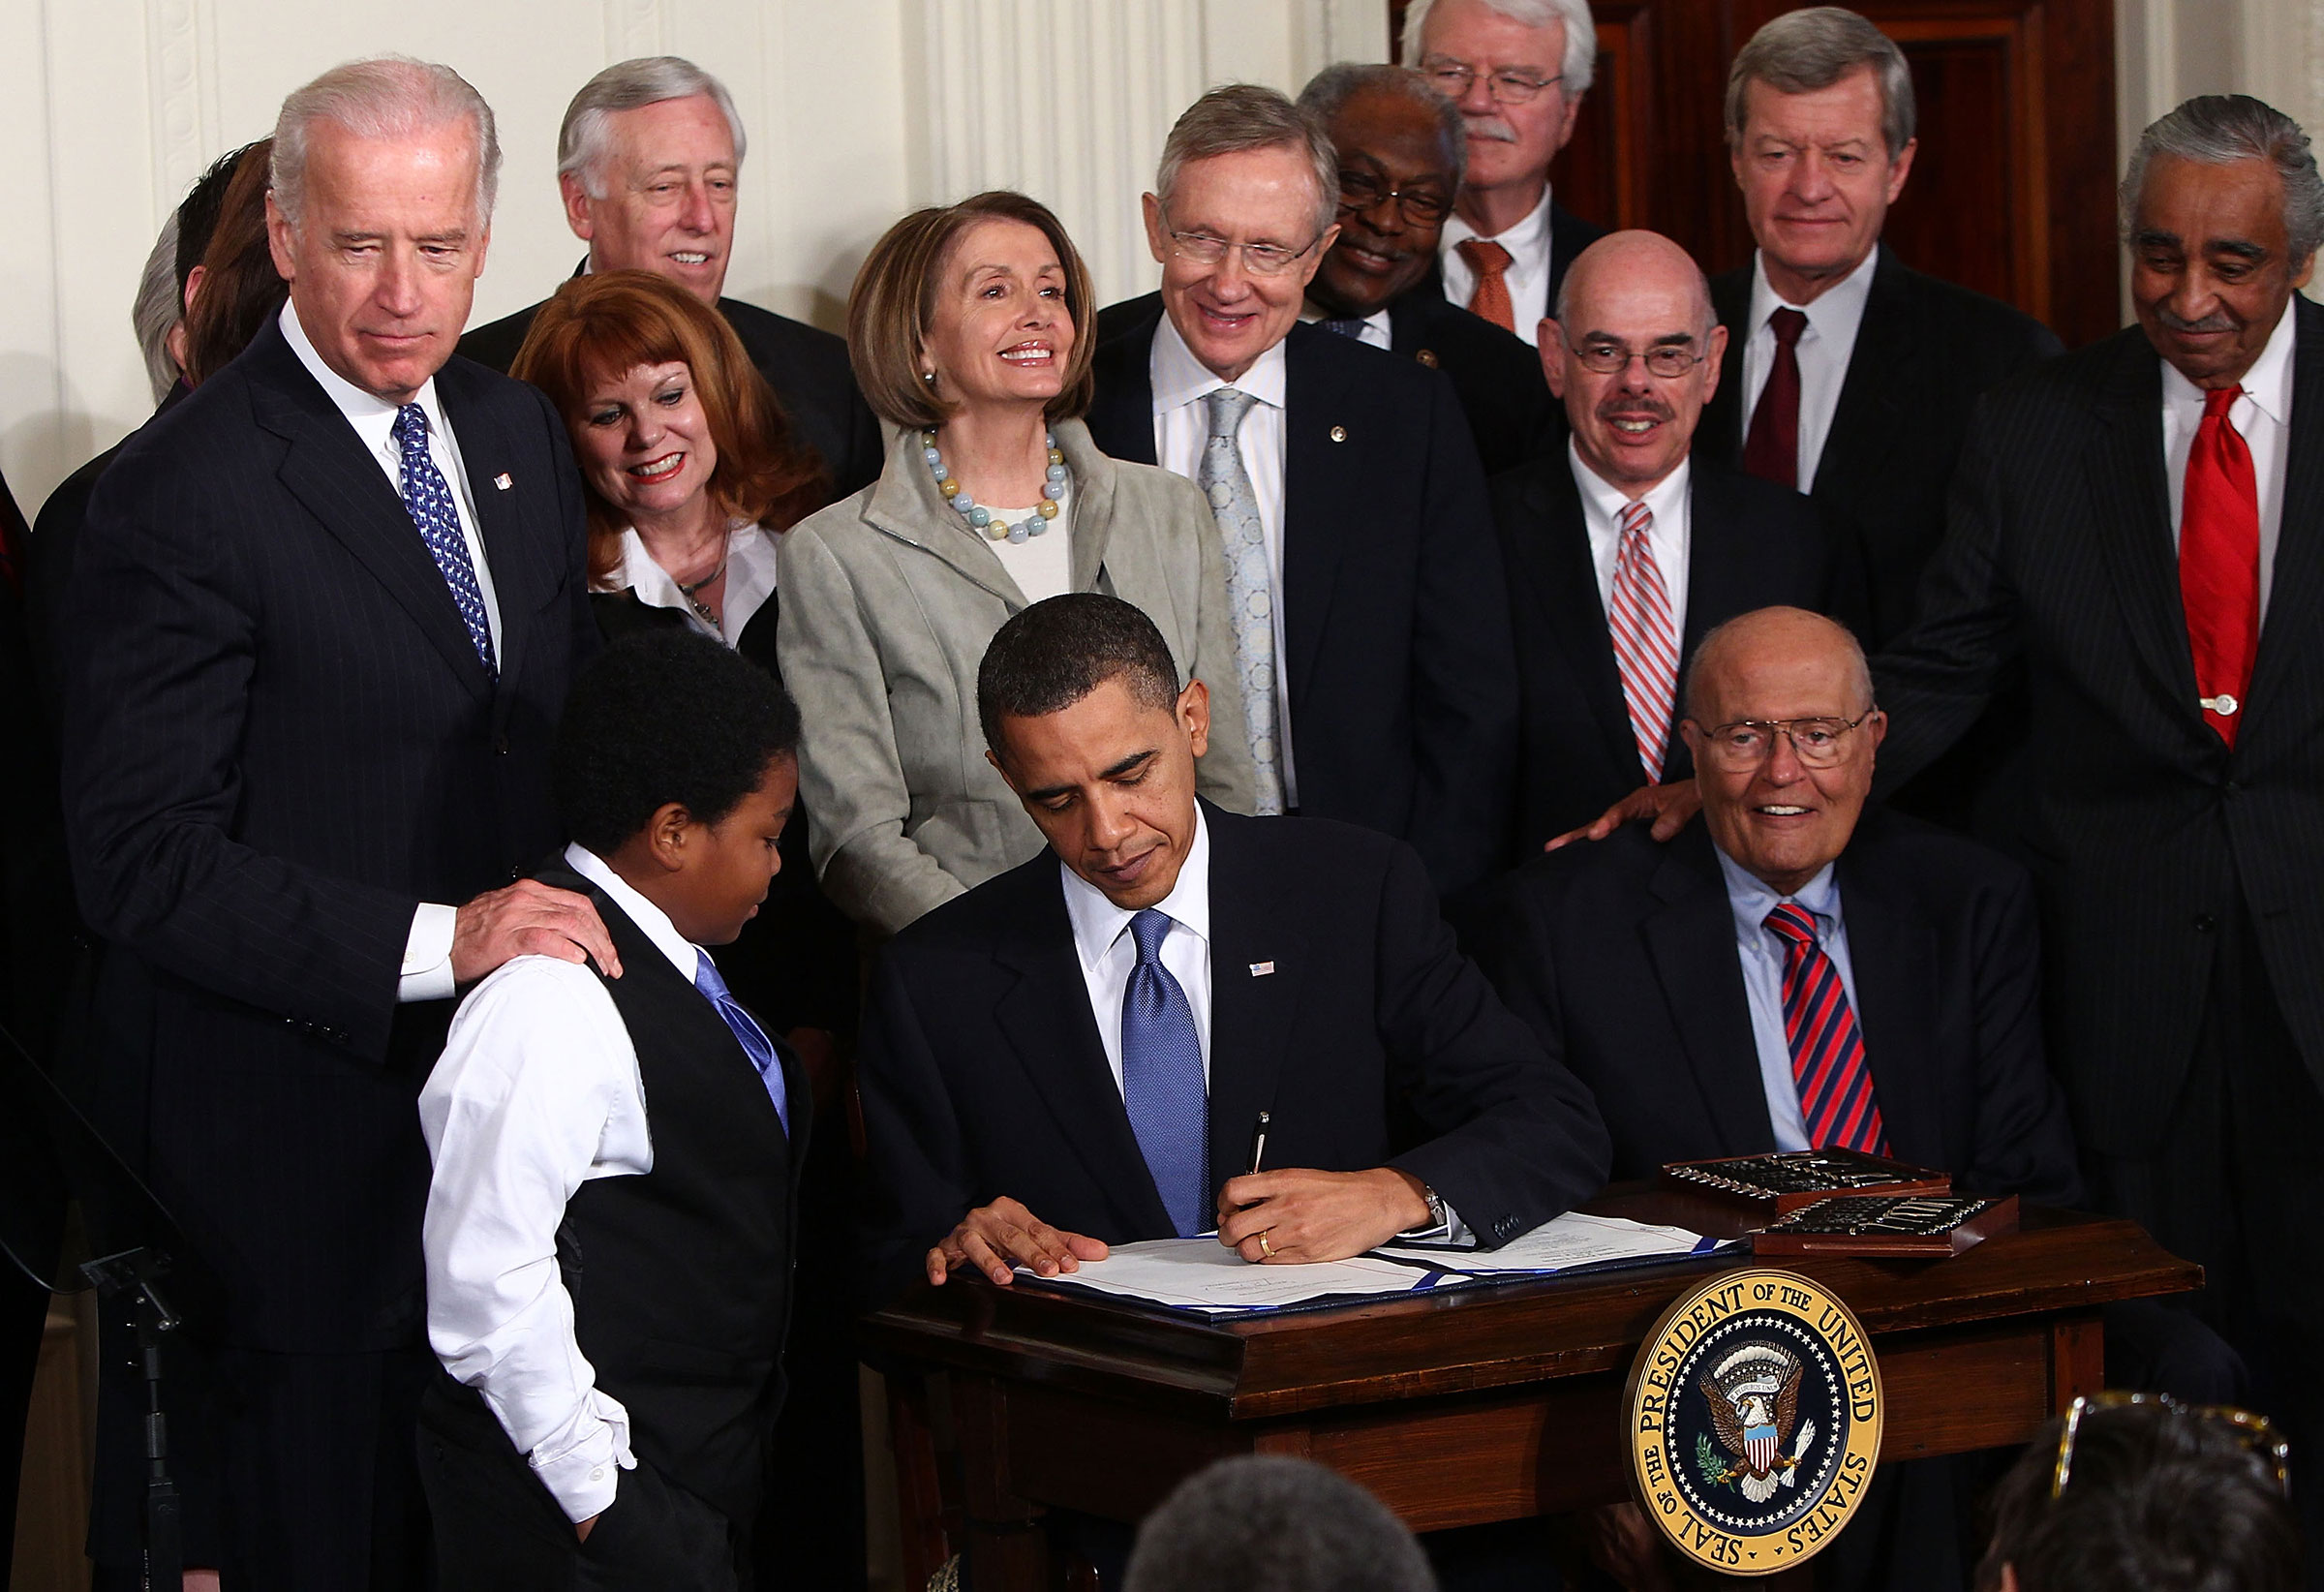 President Barack Obama signs the Affordable Health Care for America Act during a ceremony with fellow Democrats in the East Room of the White House March 23, 2010. (Win McNamee—Getty Images)